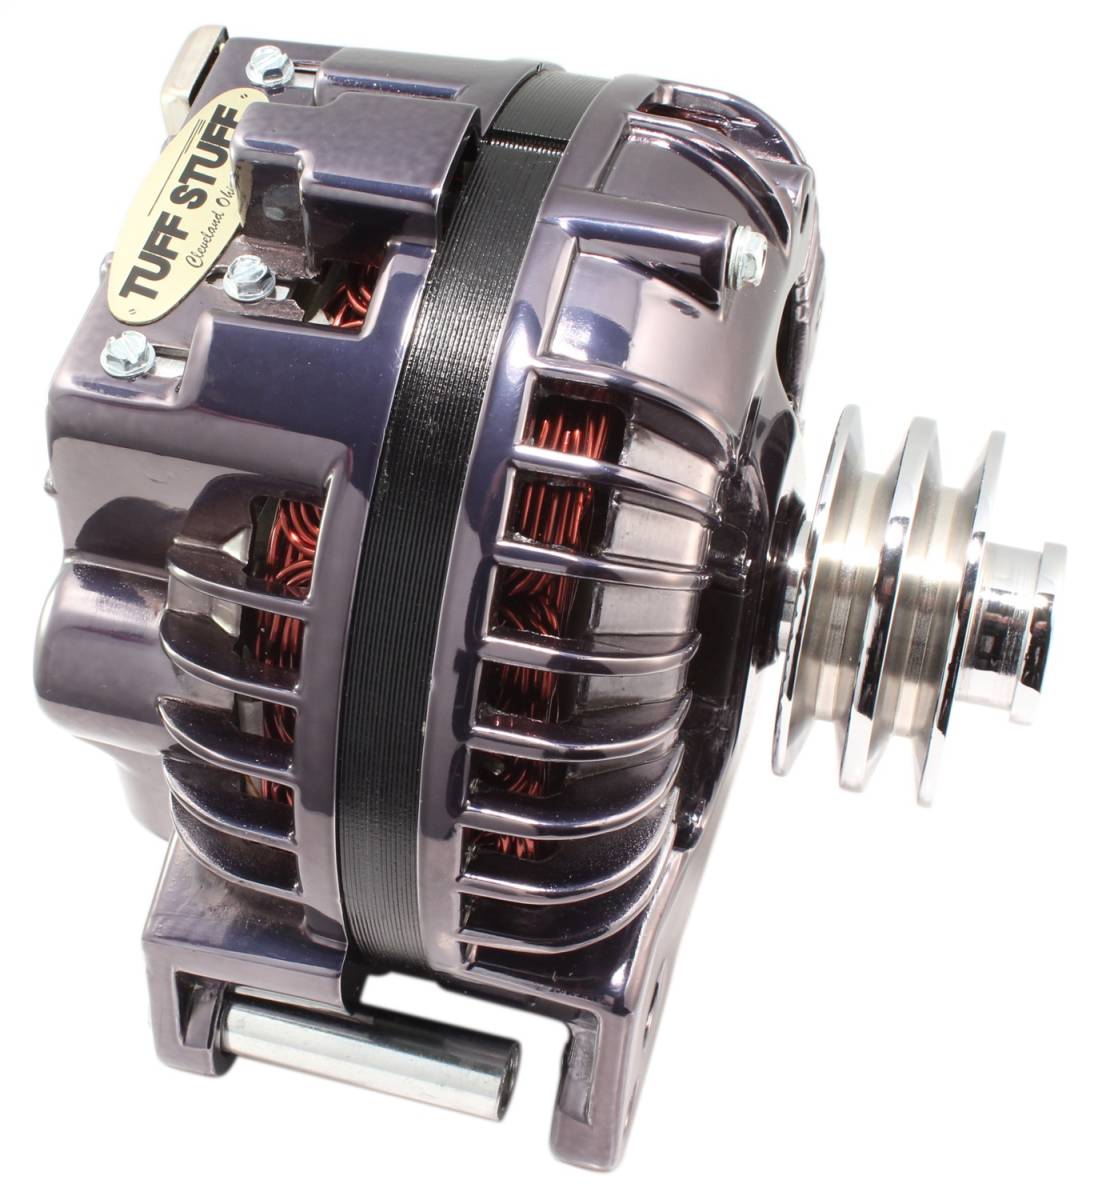 Tuff Stuff Performance - Alternator 130 AMP 1 Wire Double Groove Pulley Black Chrome 9509RDDP7